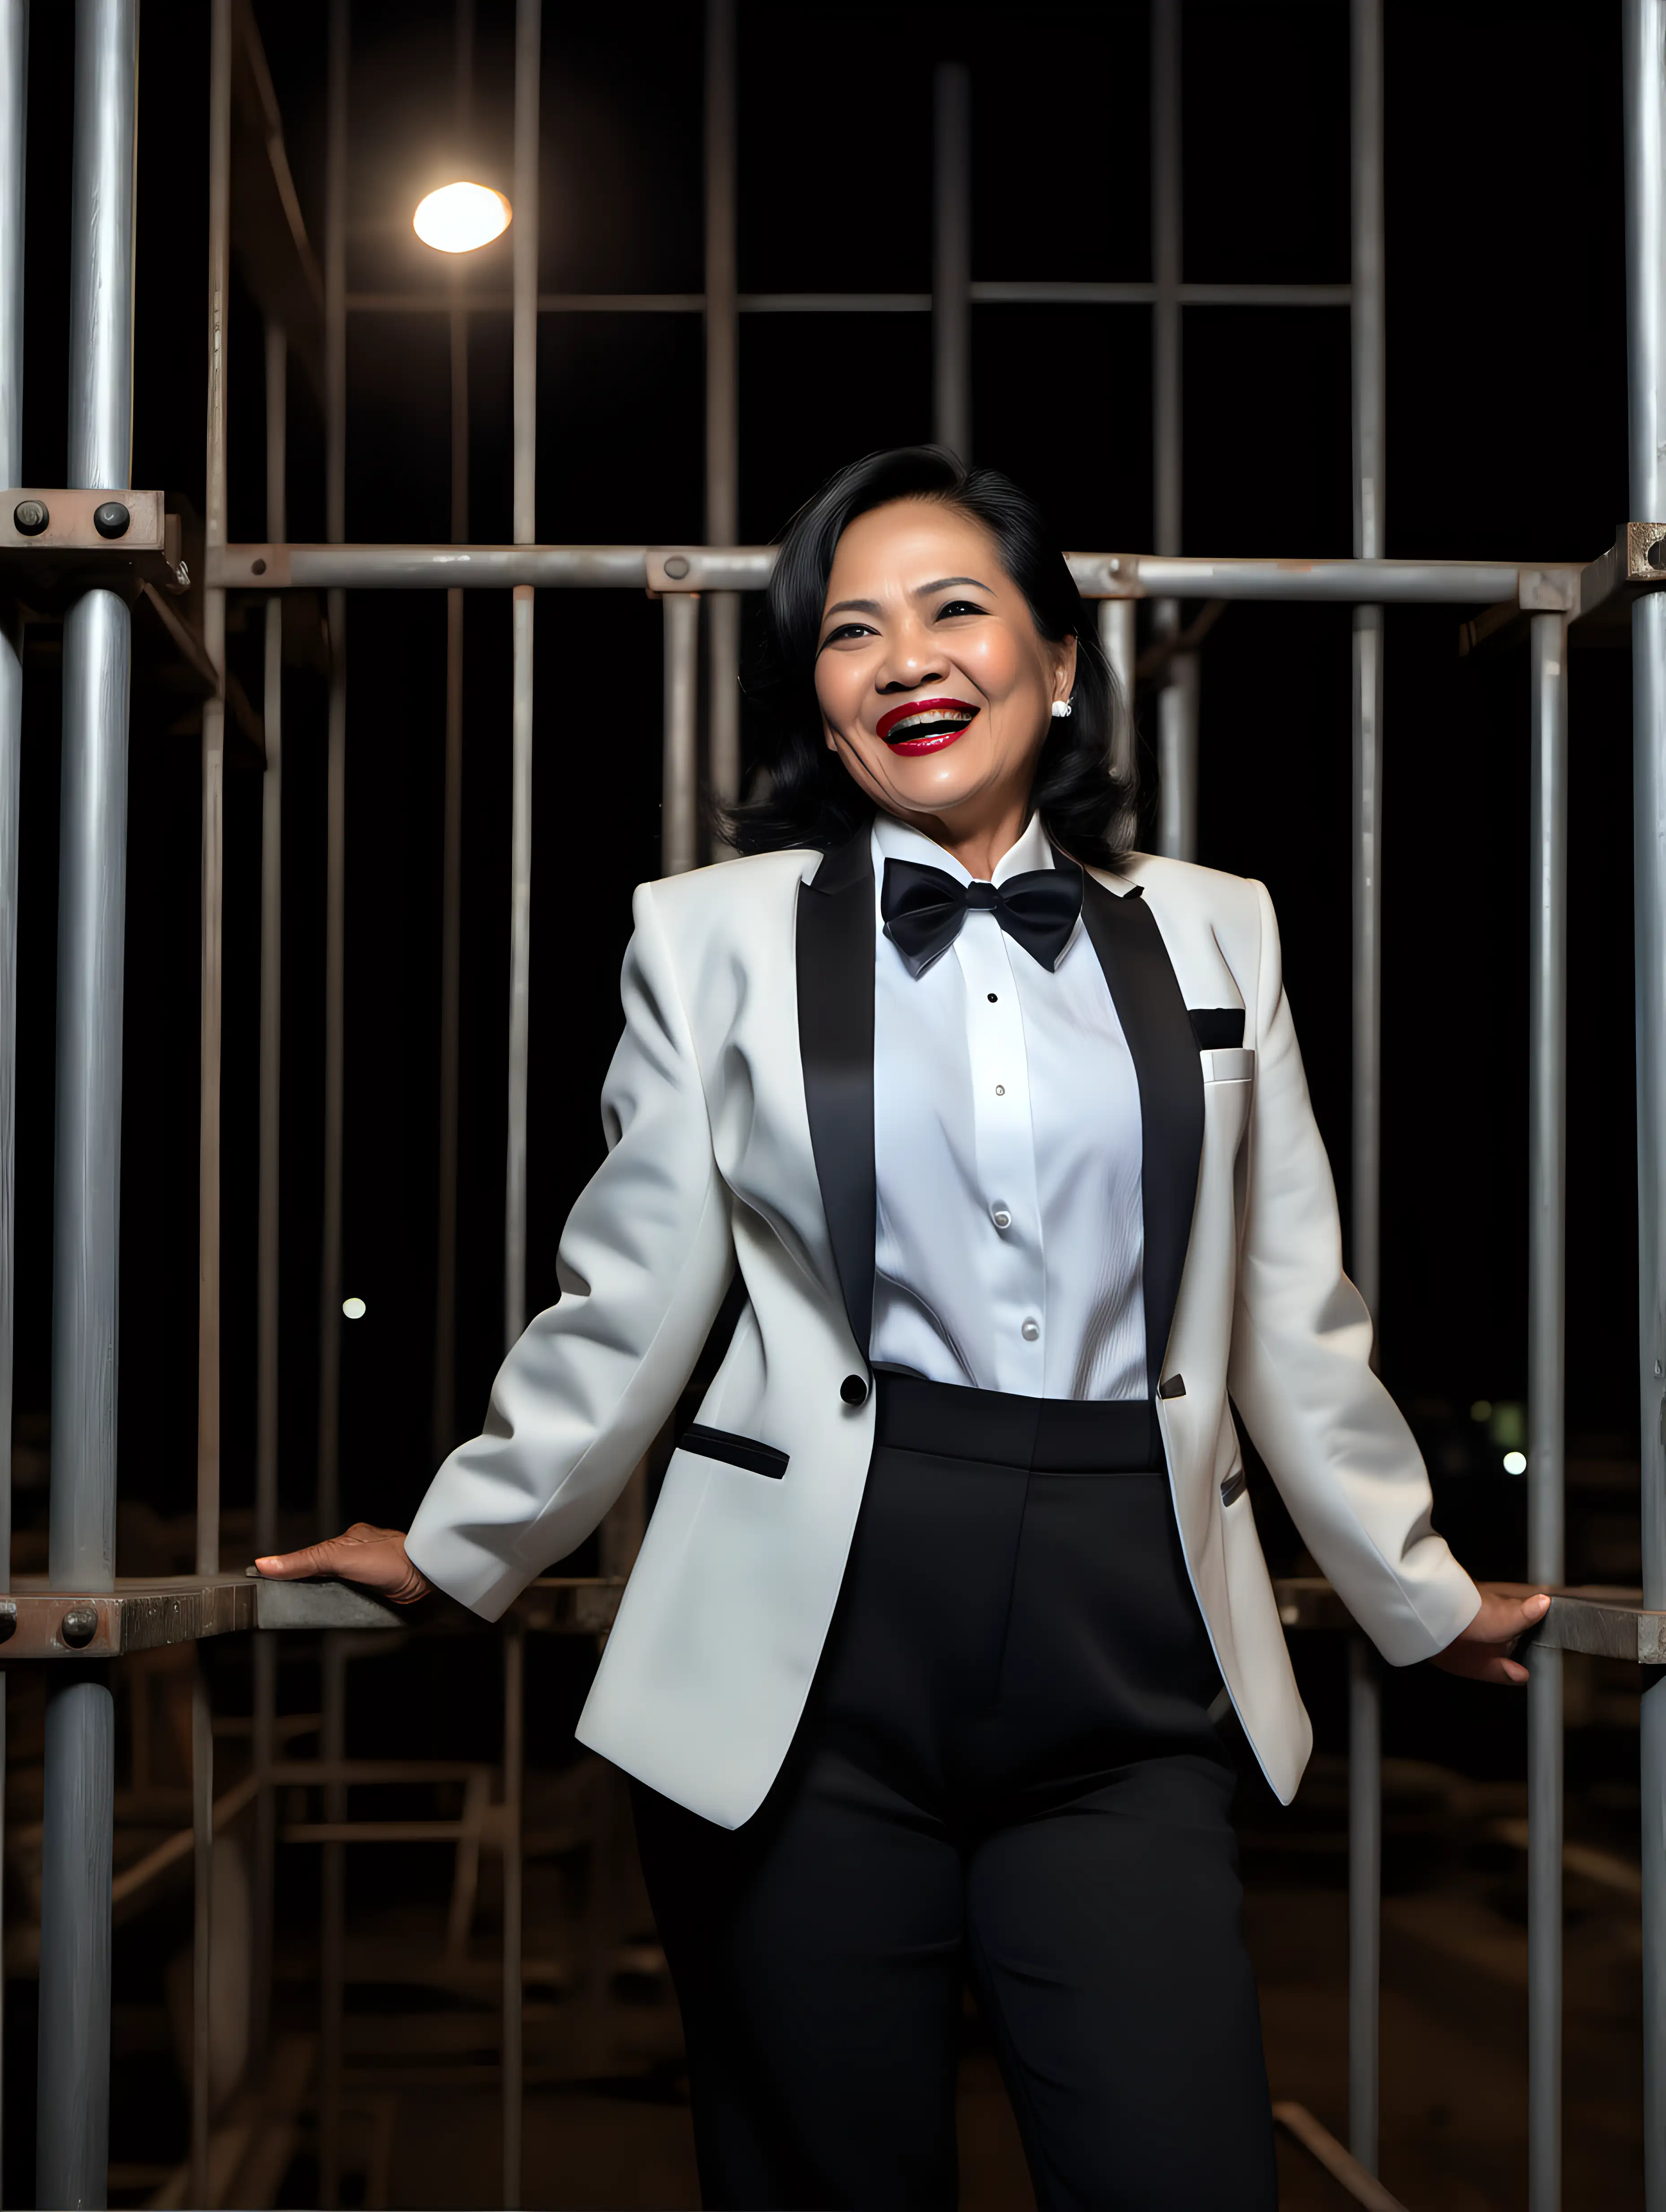 Confident-Indonesian-Woman-in-Tuxedo-Laughing-at-Night